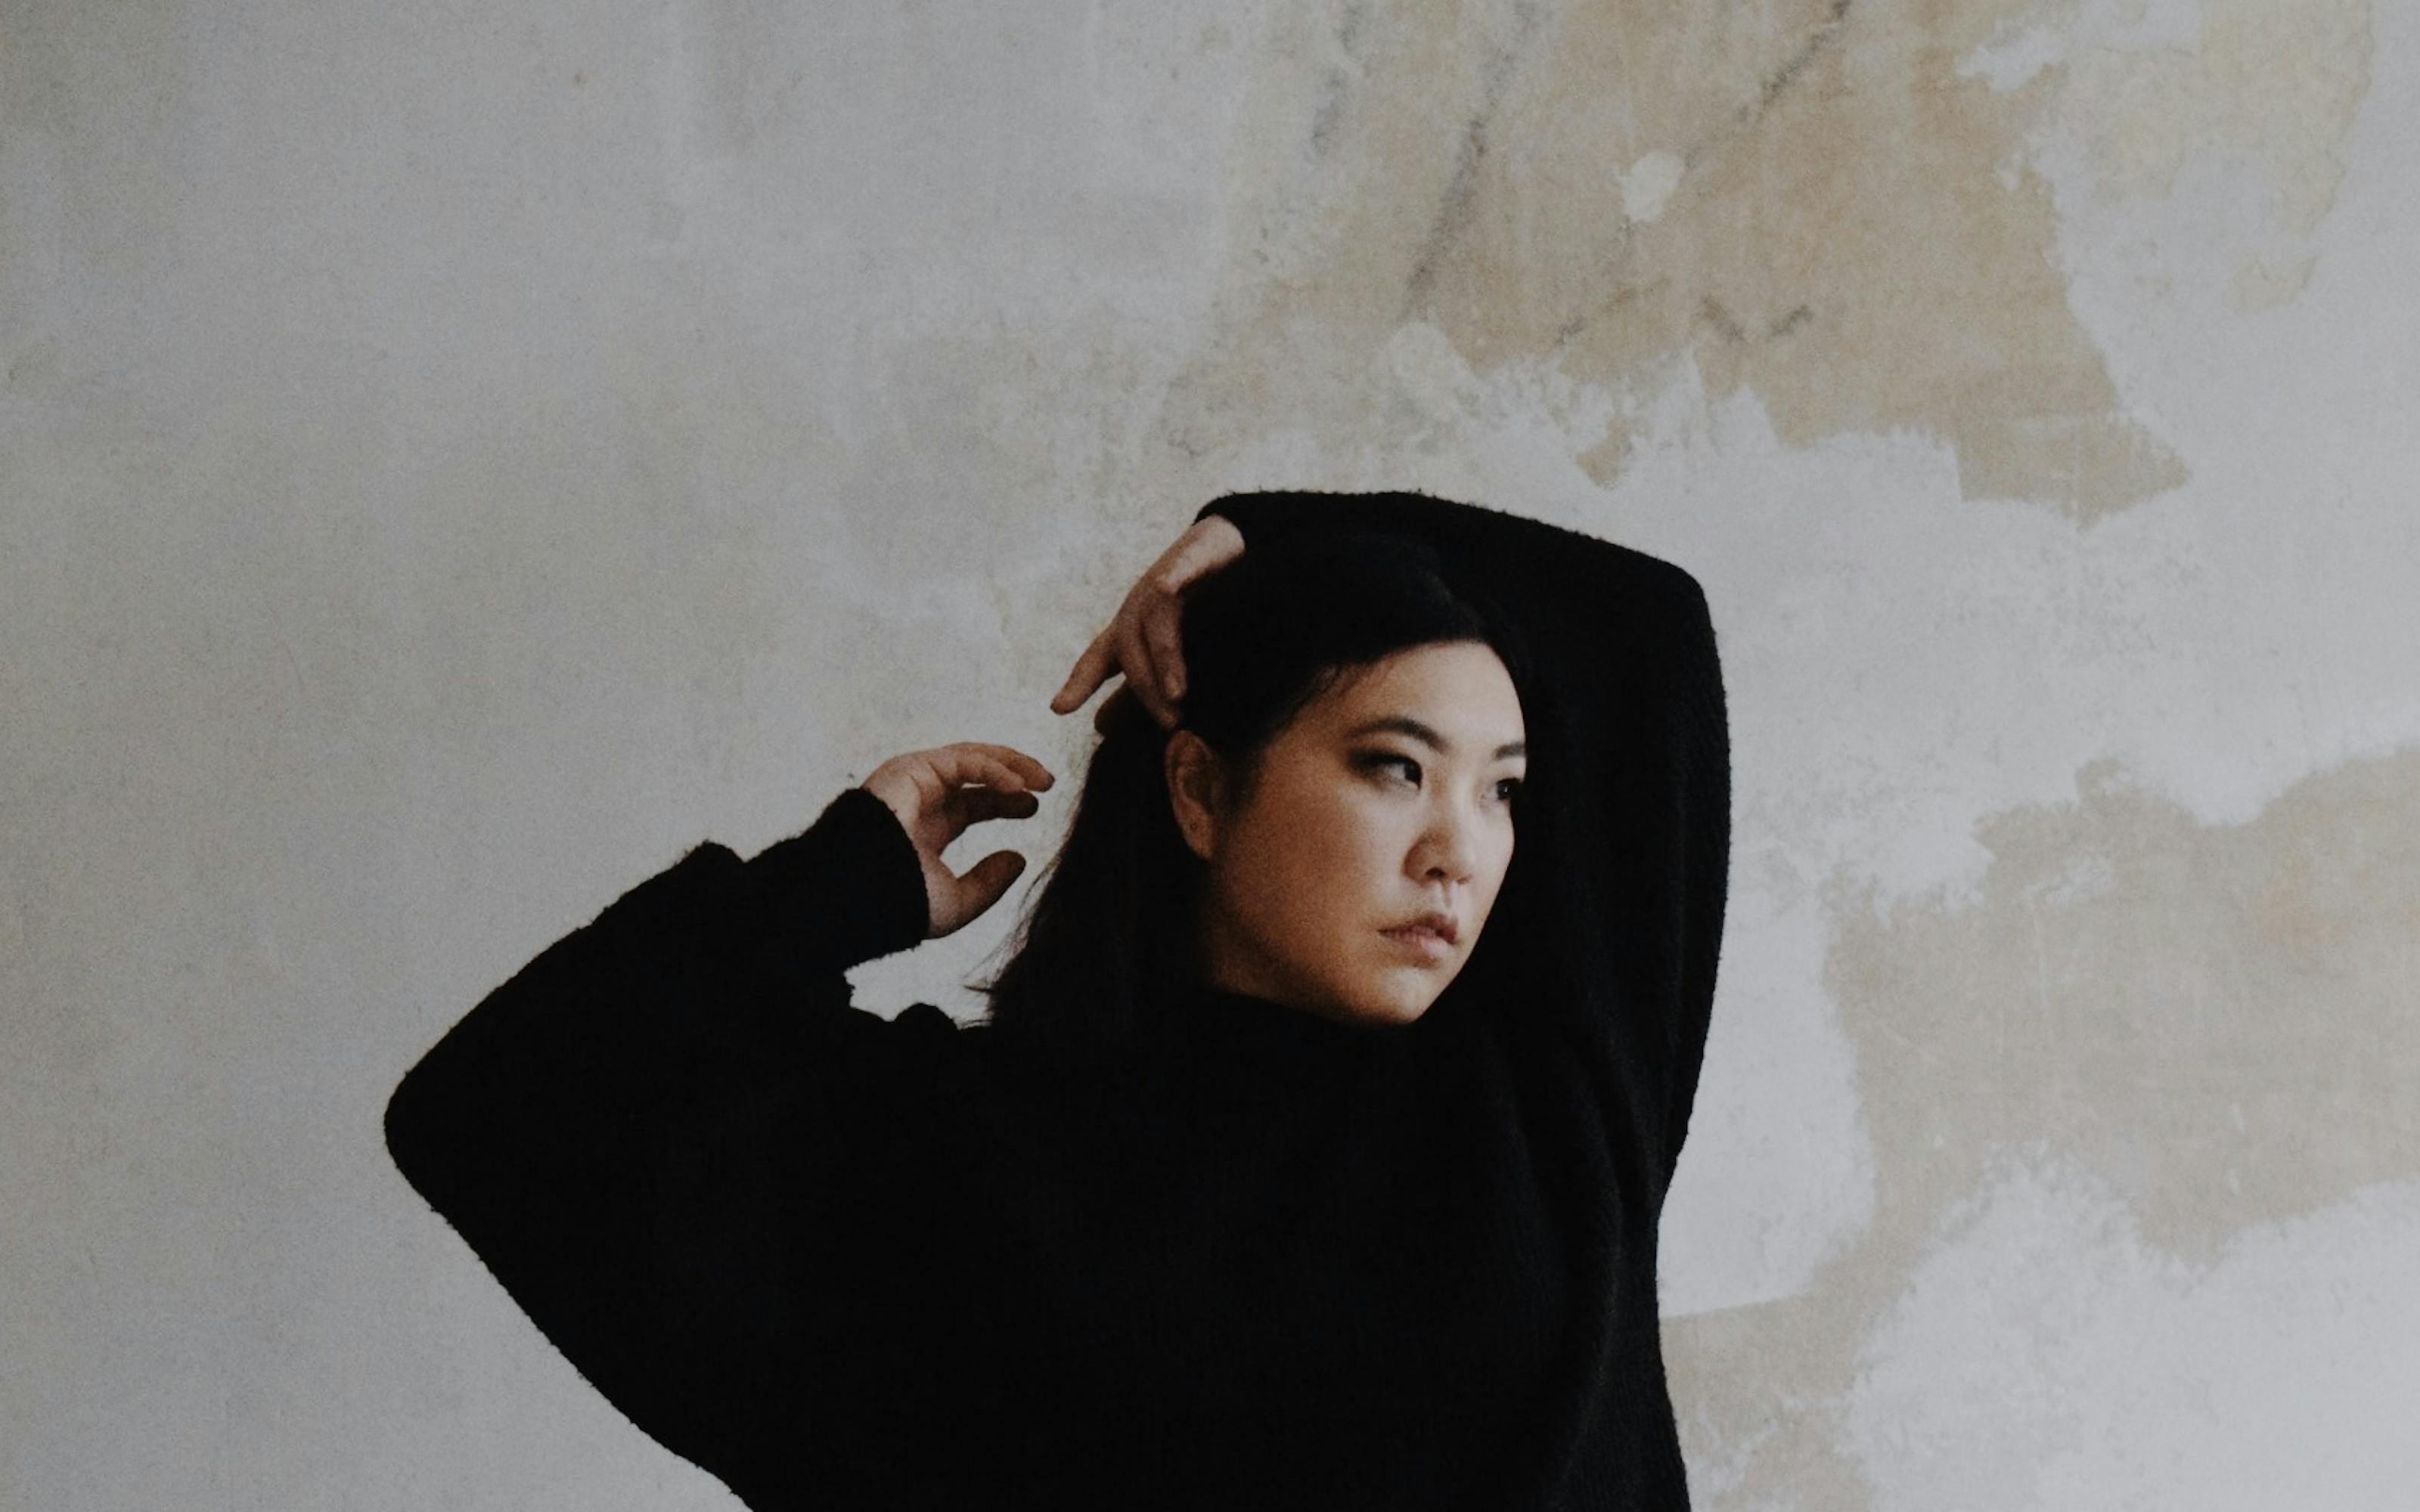 Interview with vocalist, producer and Catalyst Berlin Music student Roz Yuen